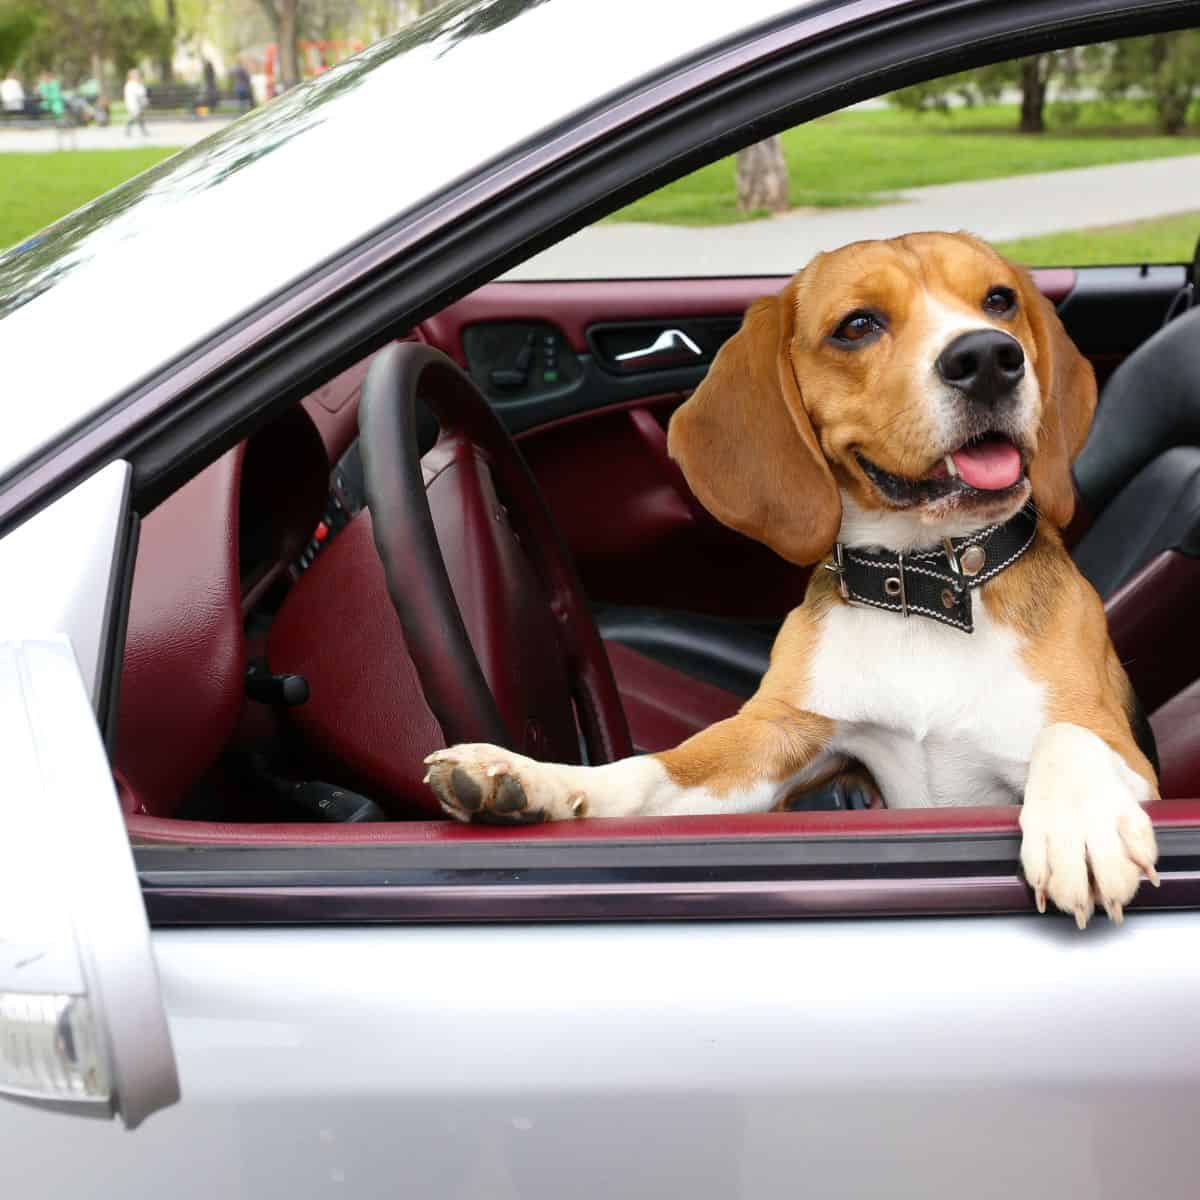 Small brown and white hound sitting in the front of a car.